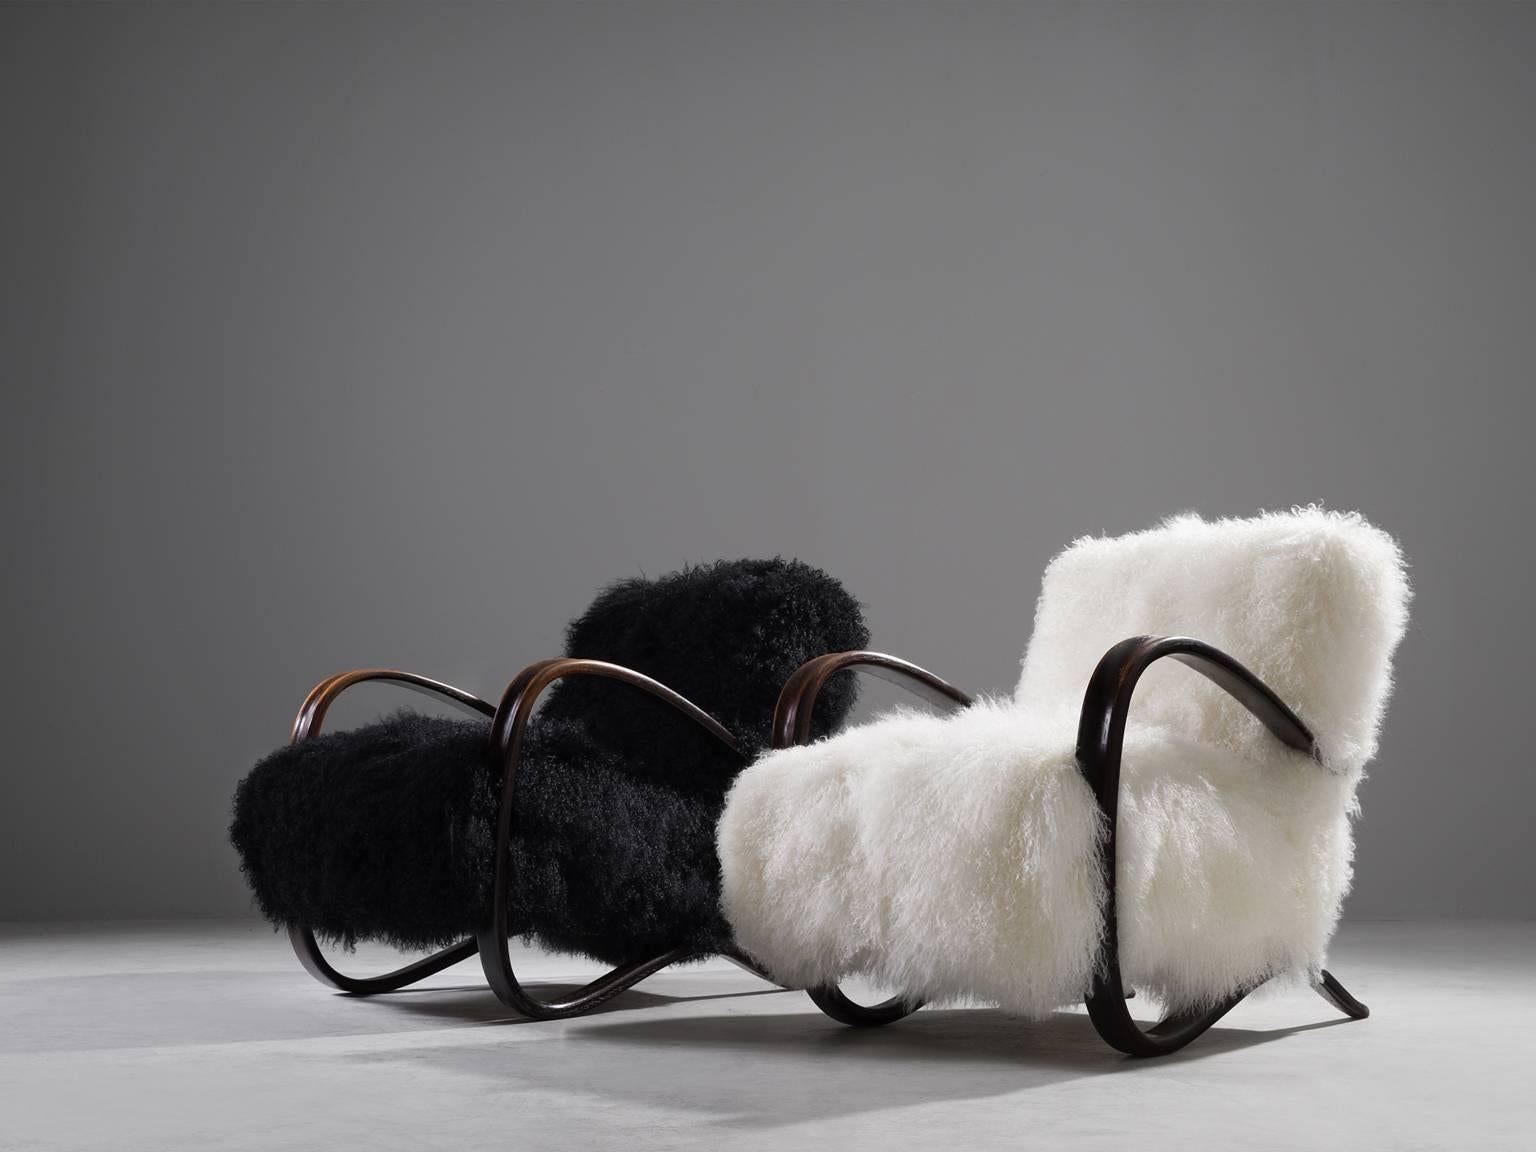 Jindrich Halabala, two lounge chairs, beech and sheepskin, Czech Republic, 1930s. 

This extraordinary pair of Halabala chairs are upholstered with black and white Tibetan lambs wool upholstery in our upholstery studio. These chairs have a very